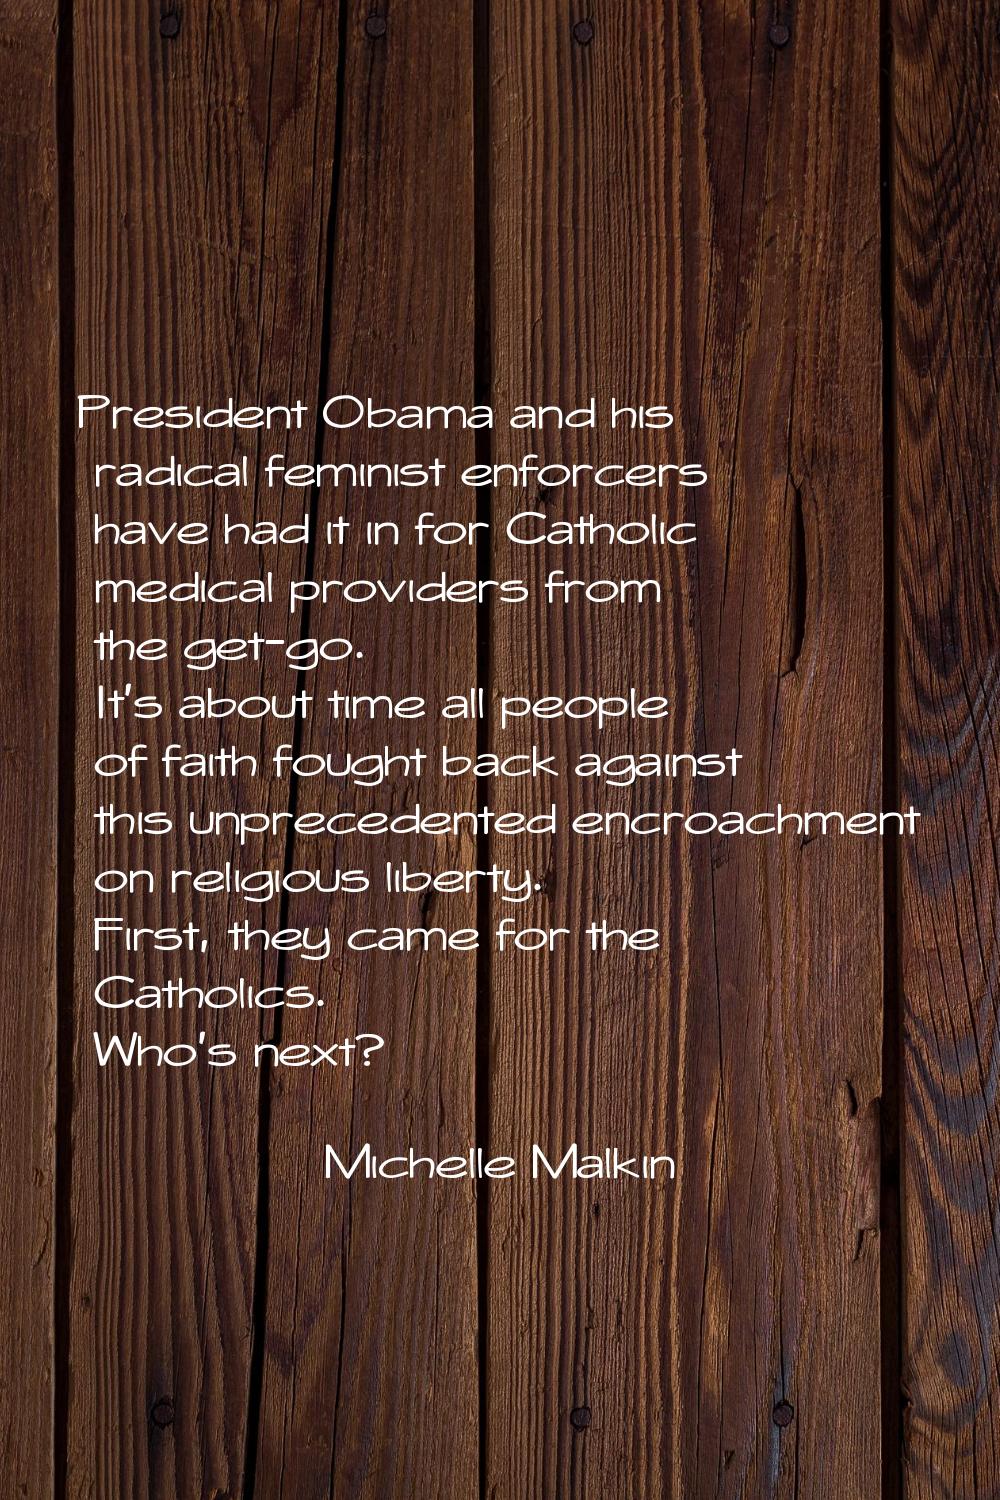 President Obama and his radical feminist enforcers have had it in for Catholic medical providers fr